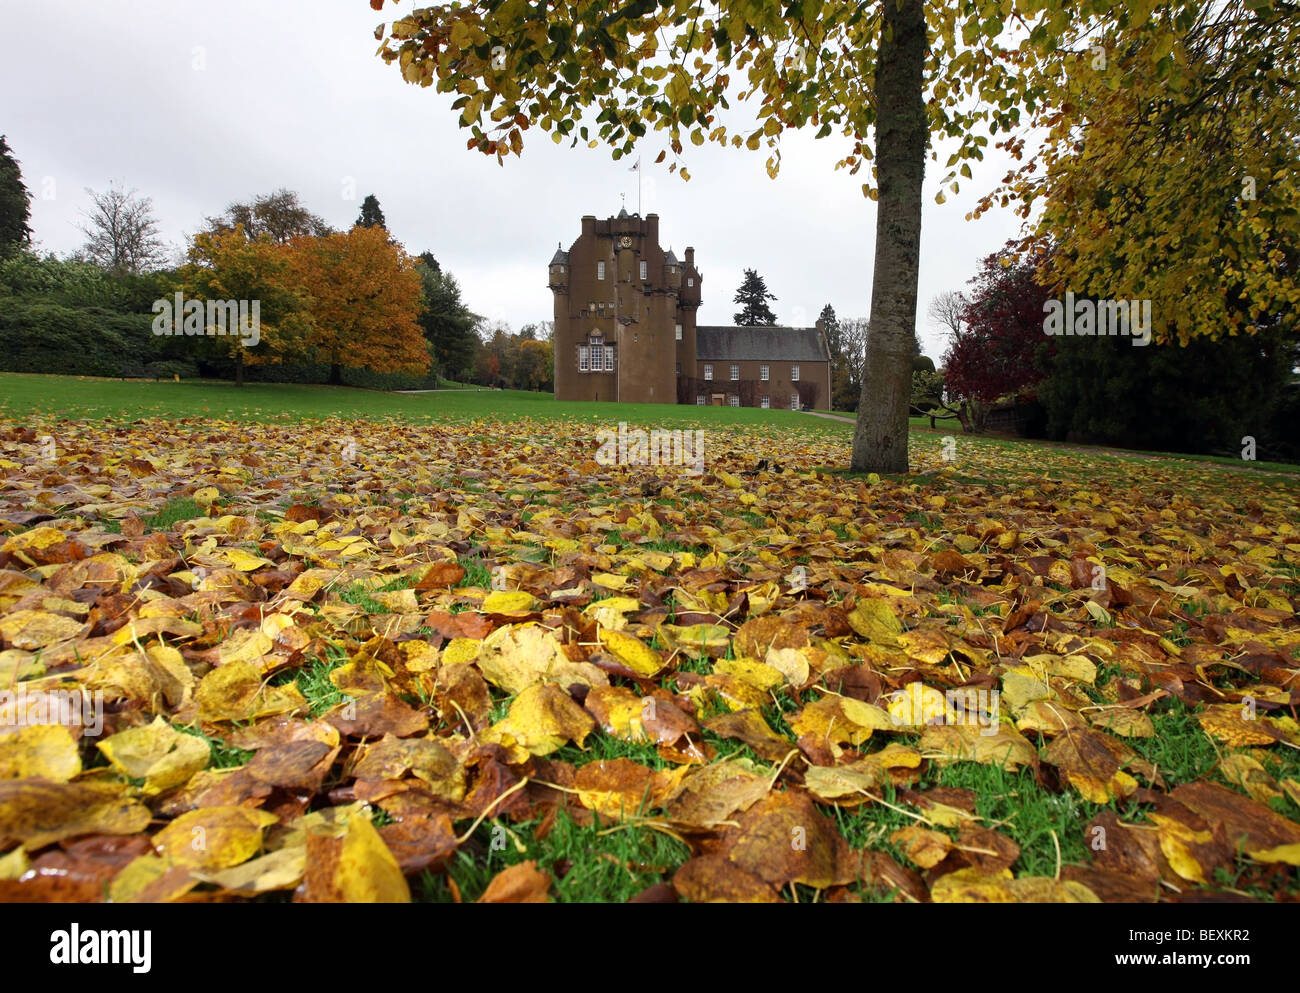 Autumnal scene with colourful leaves on the lawn at Crathes Castle, Aberdeenshire, Scotland, UK Stock Photo